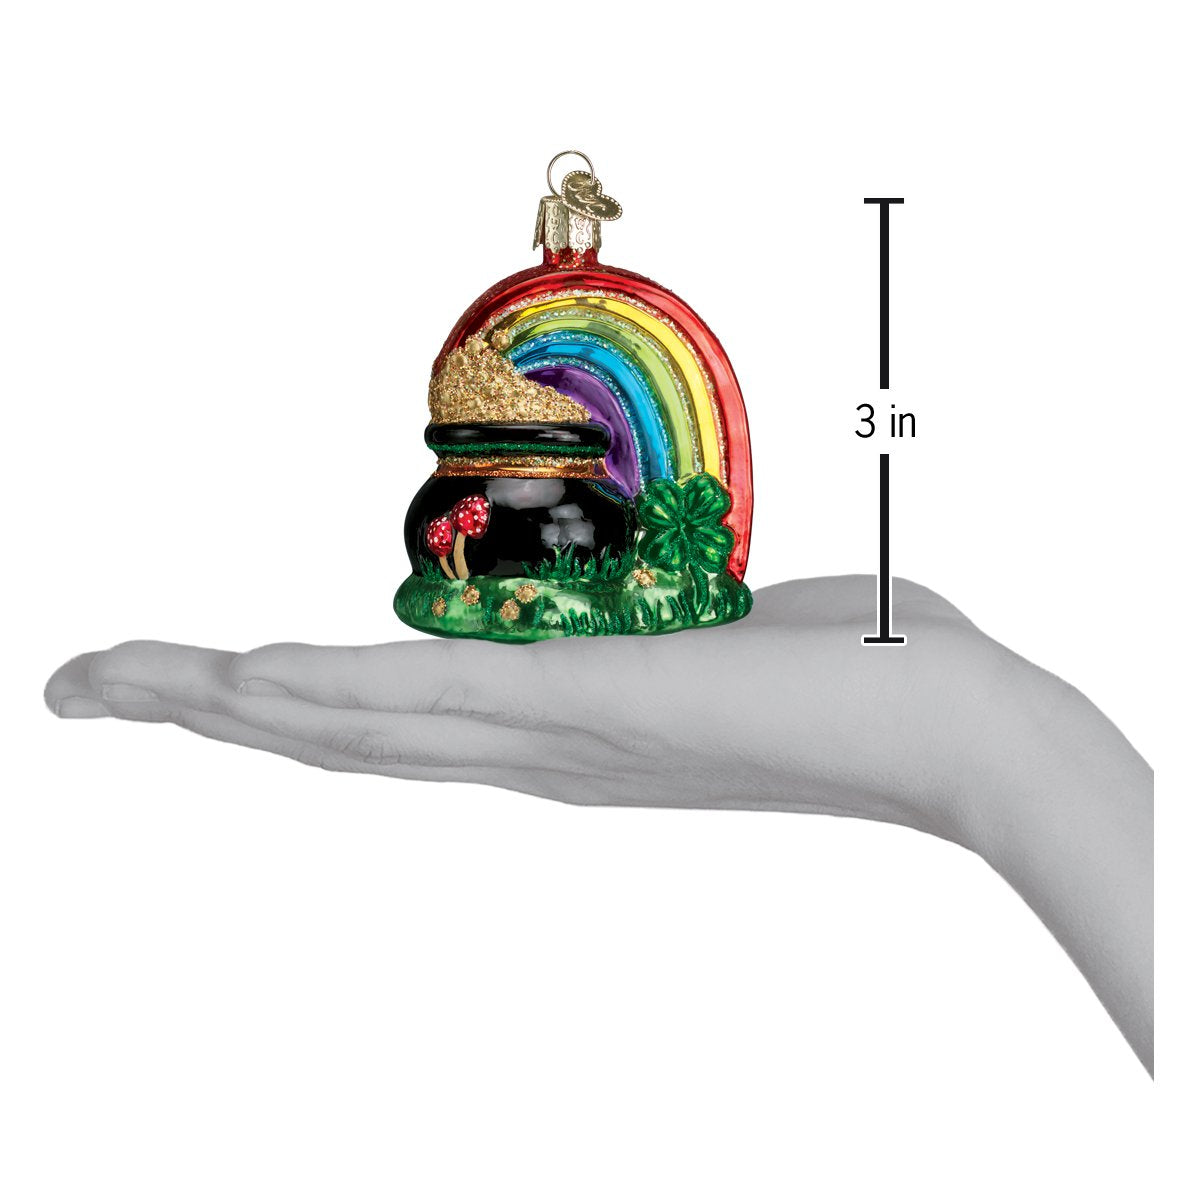 Old World Christmas - Pot Of Gold Ornament    